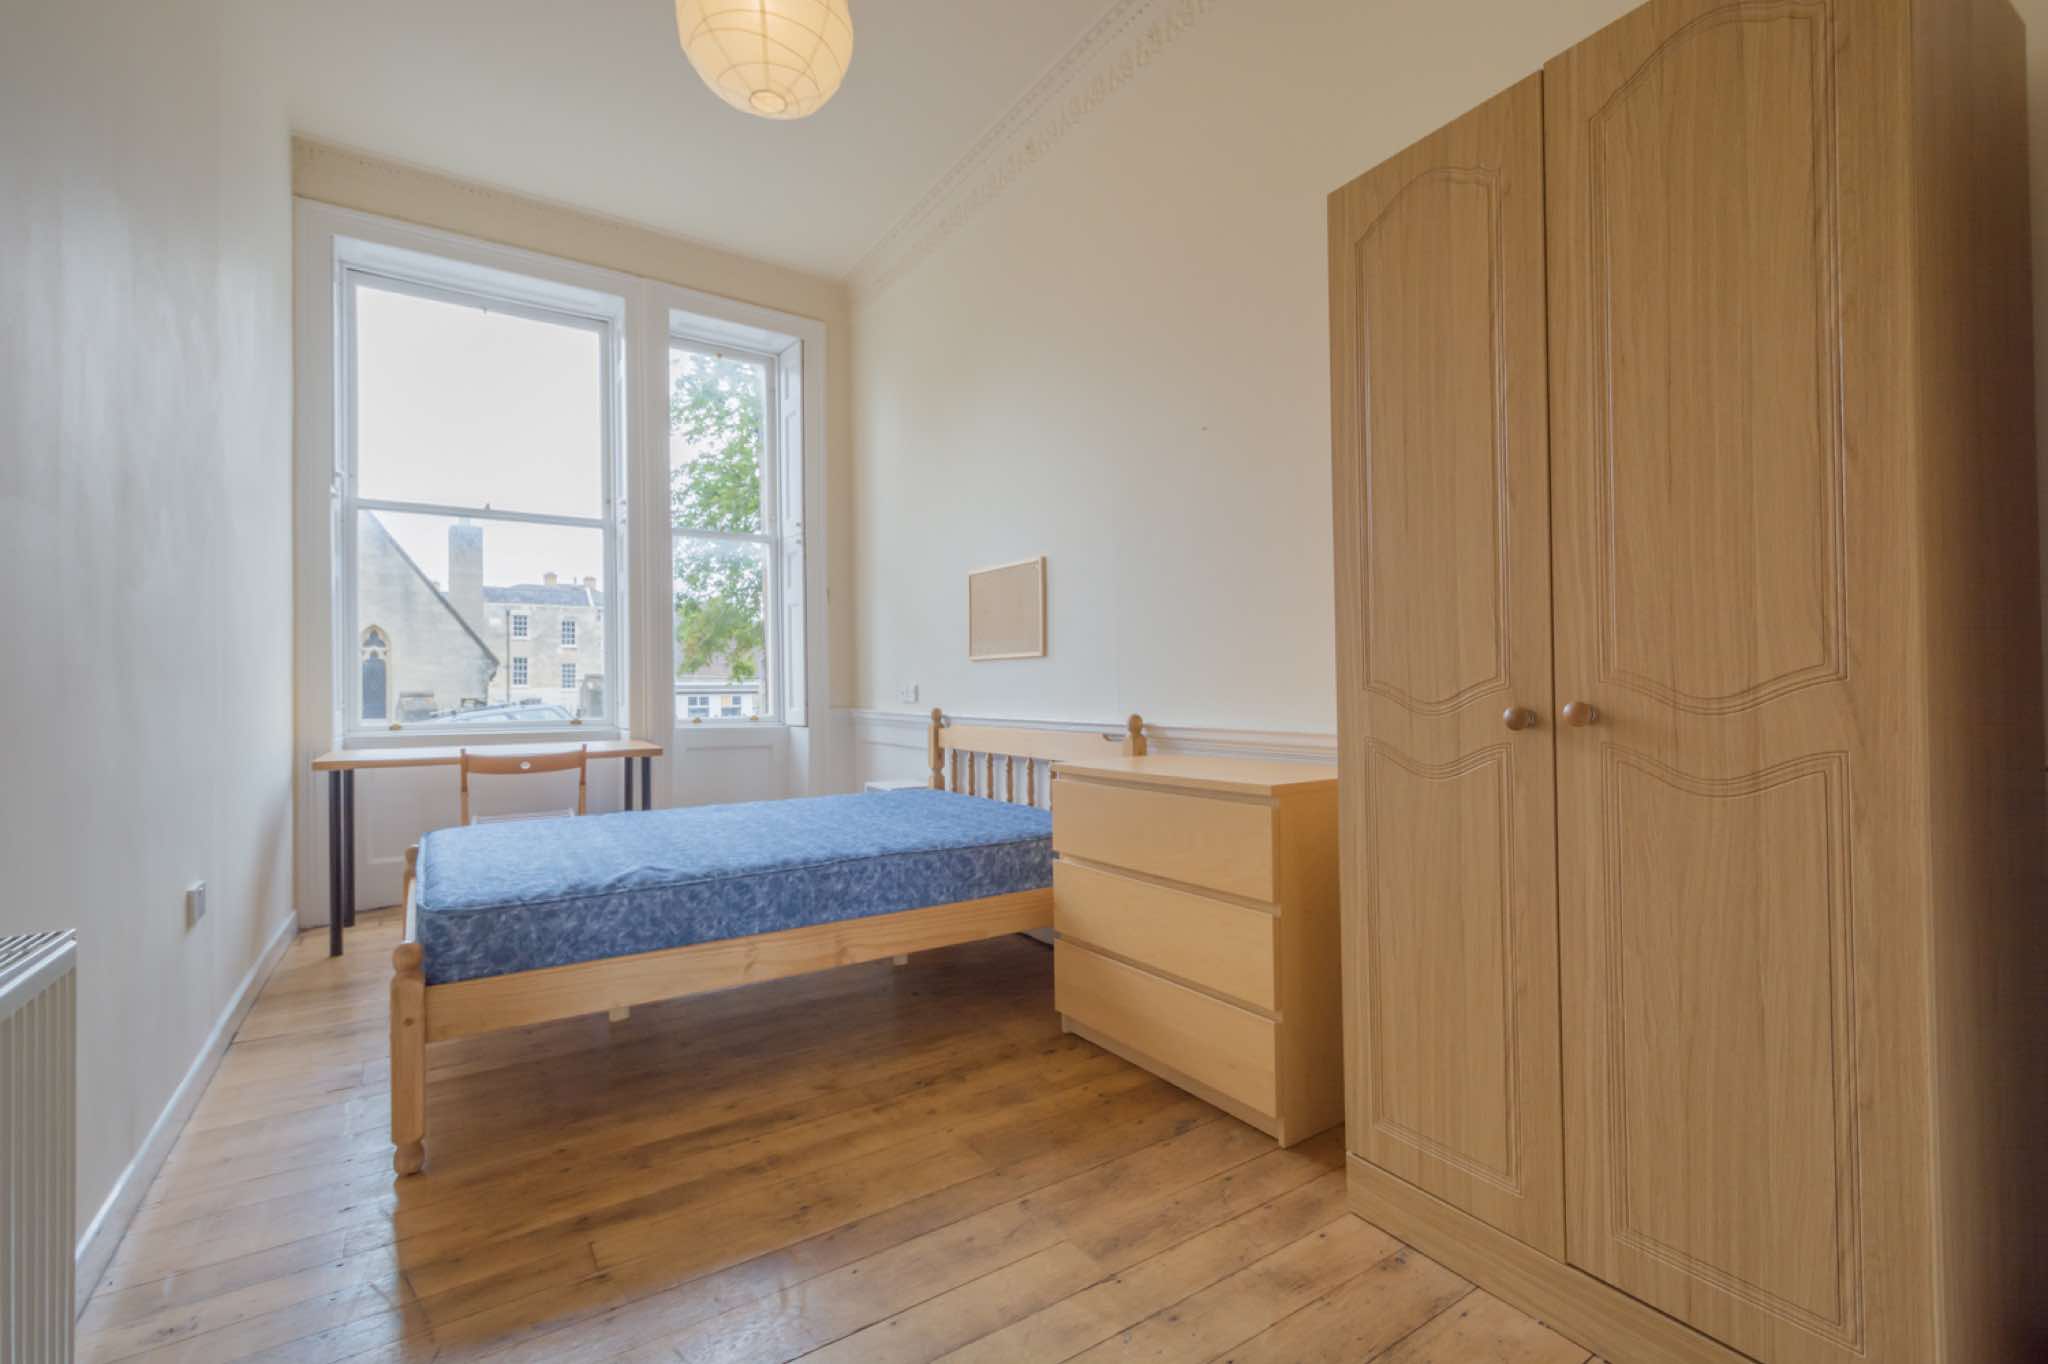 Bath student house to let with 9 bedrooms